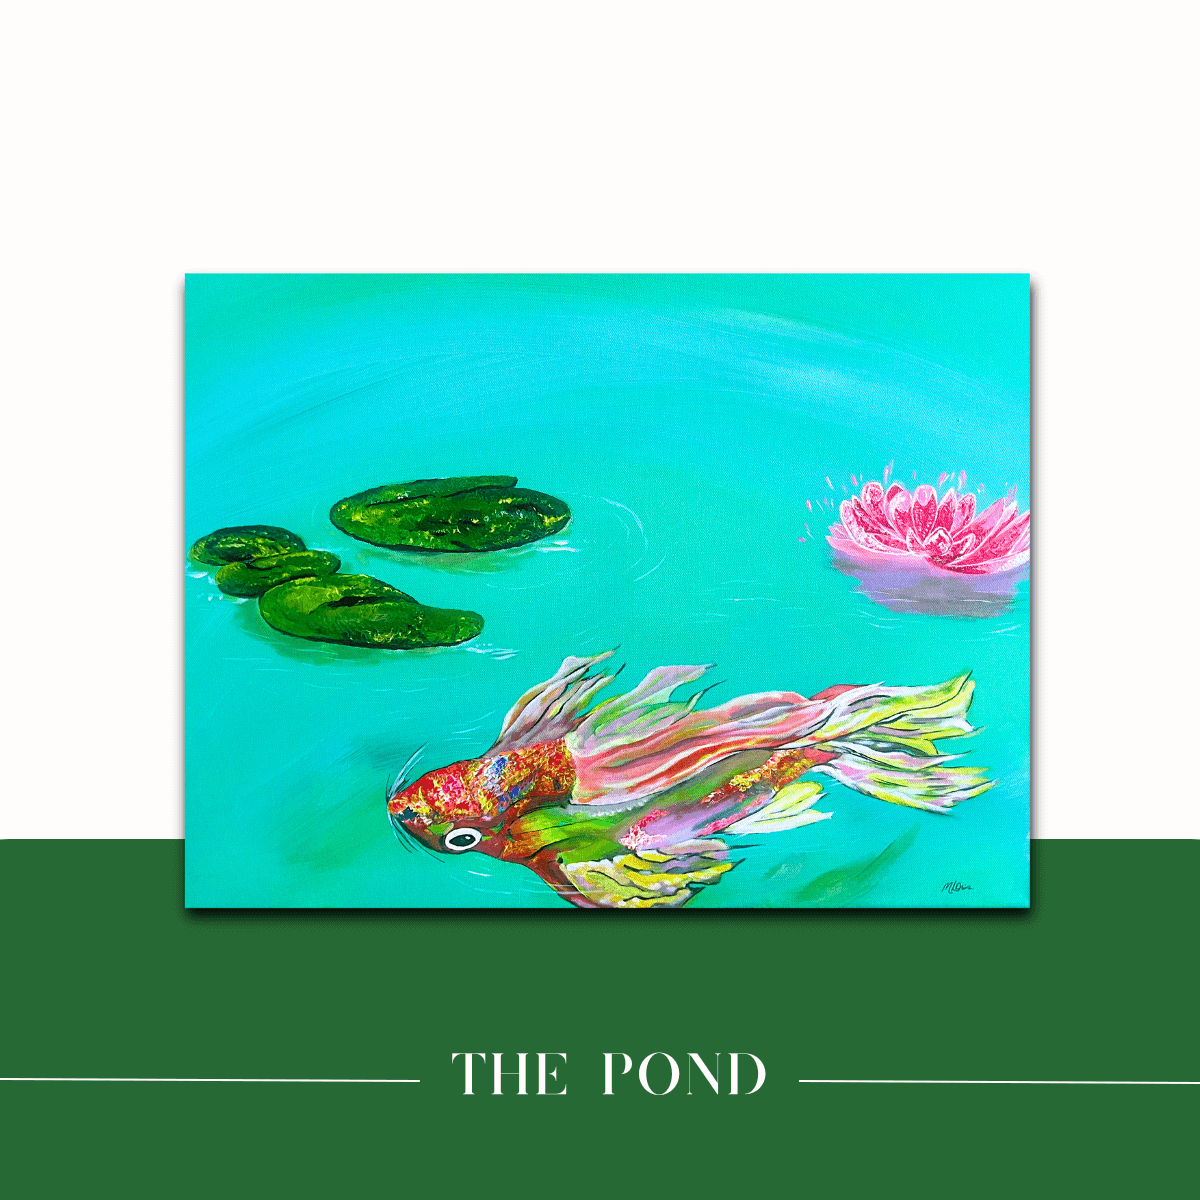 Mireille fine Art, original acrylic on canvas abstract fine art painting of catfish in koi pond with lotus flower, lily pads, modern artwork